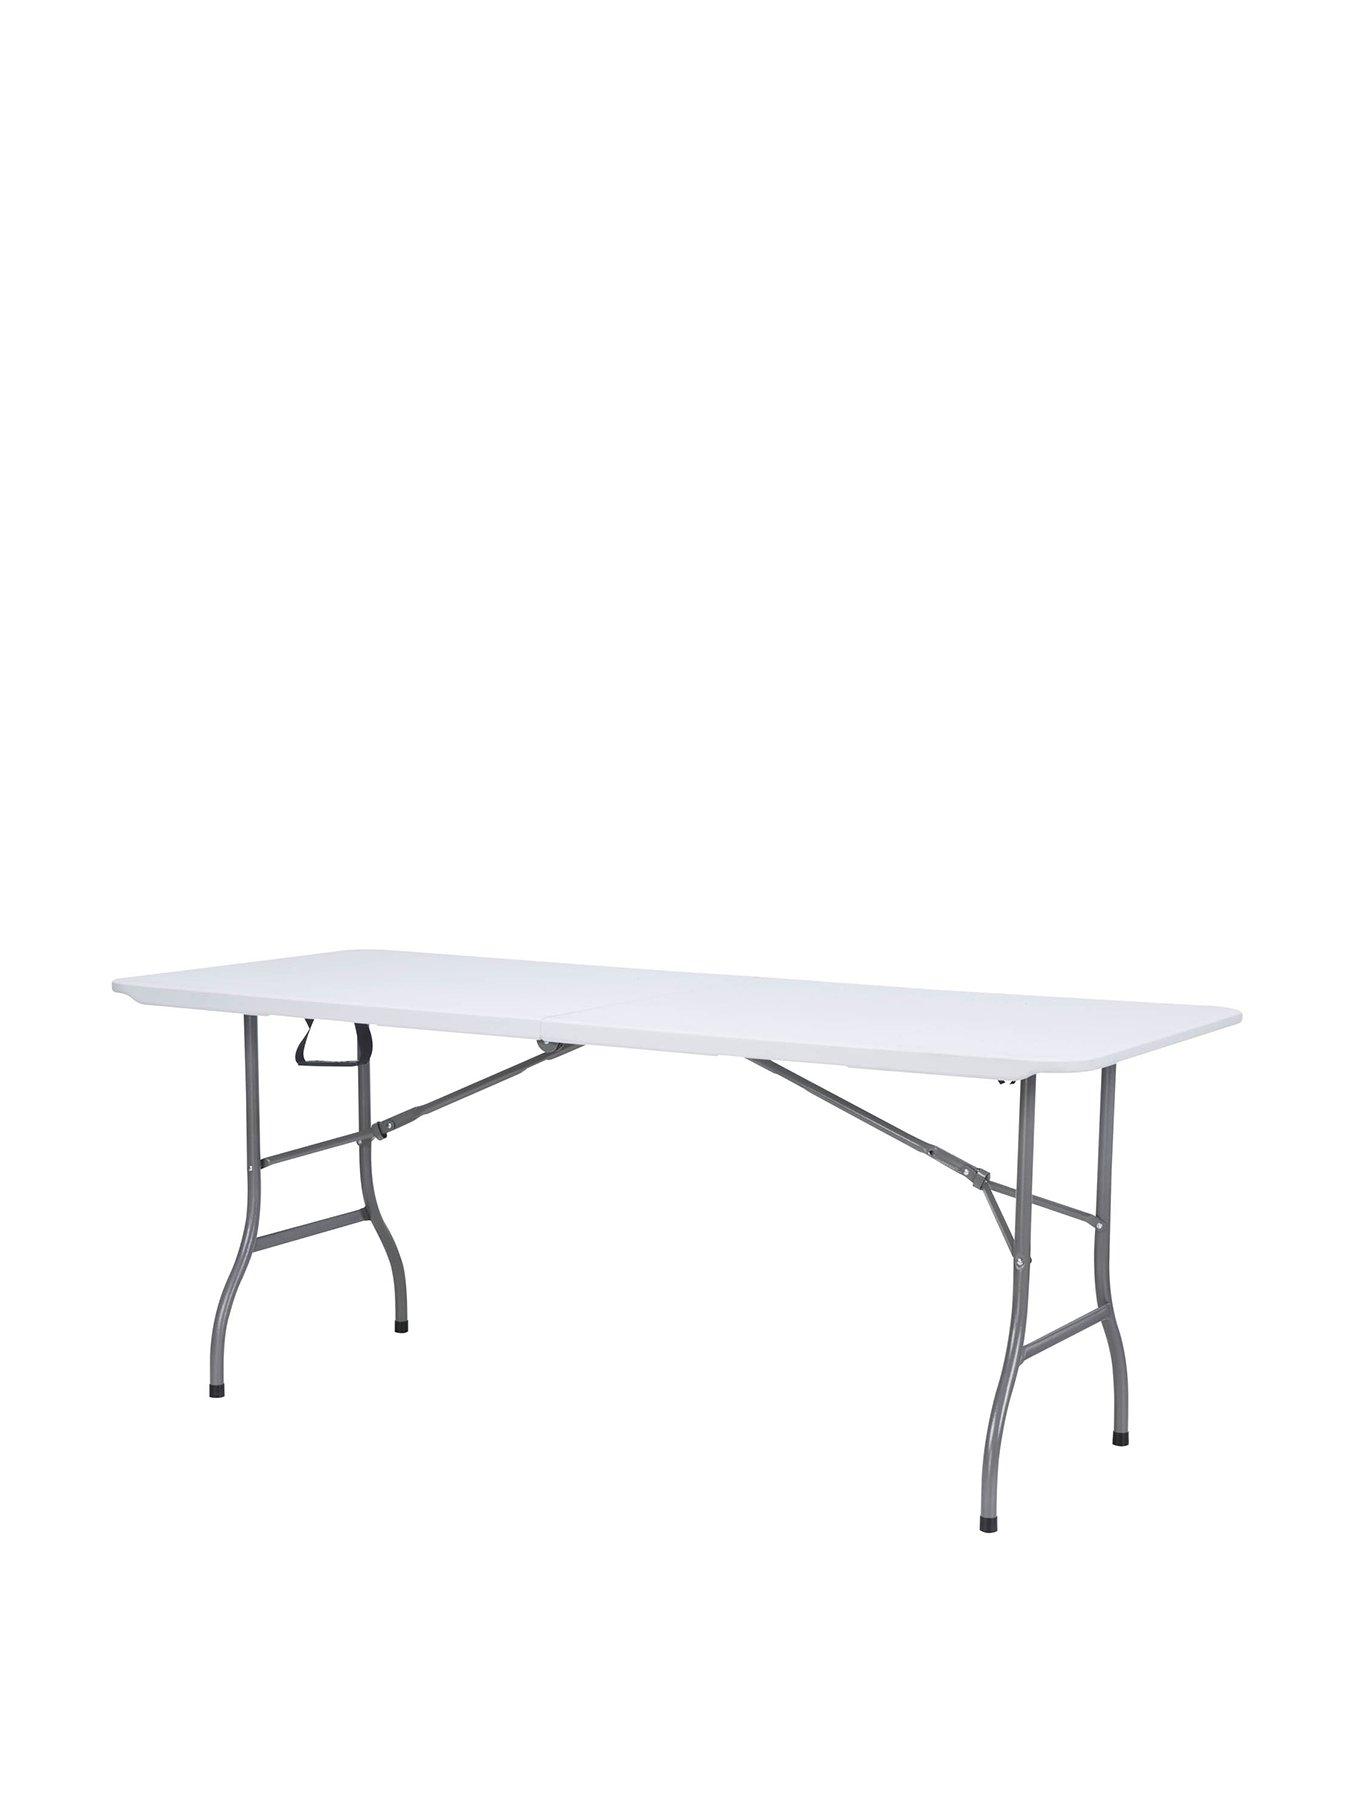 Streetwize Accessories 6Ft Blow Moulded Table